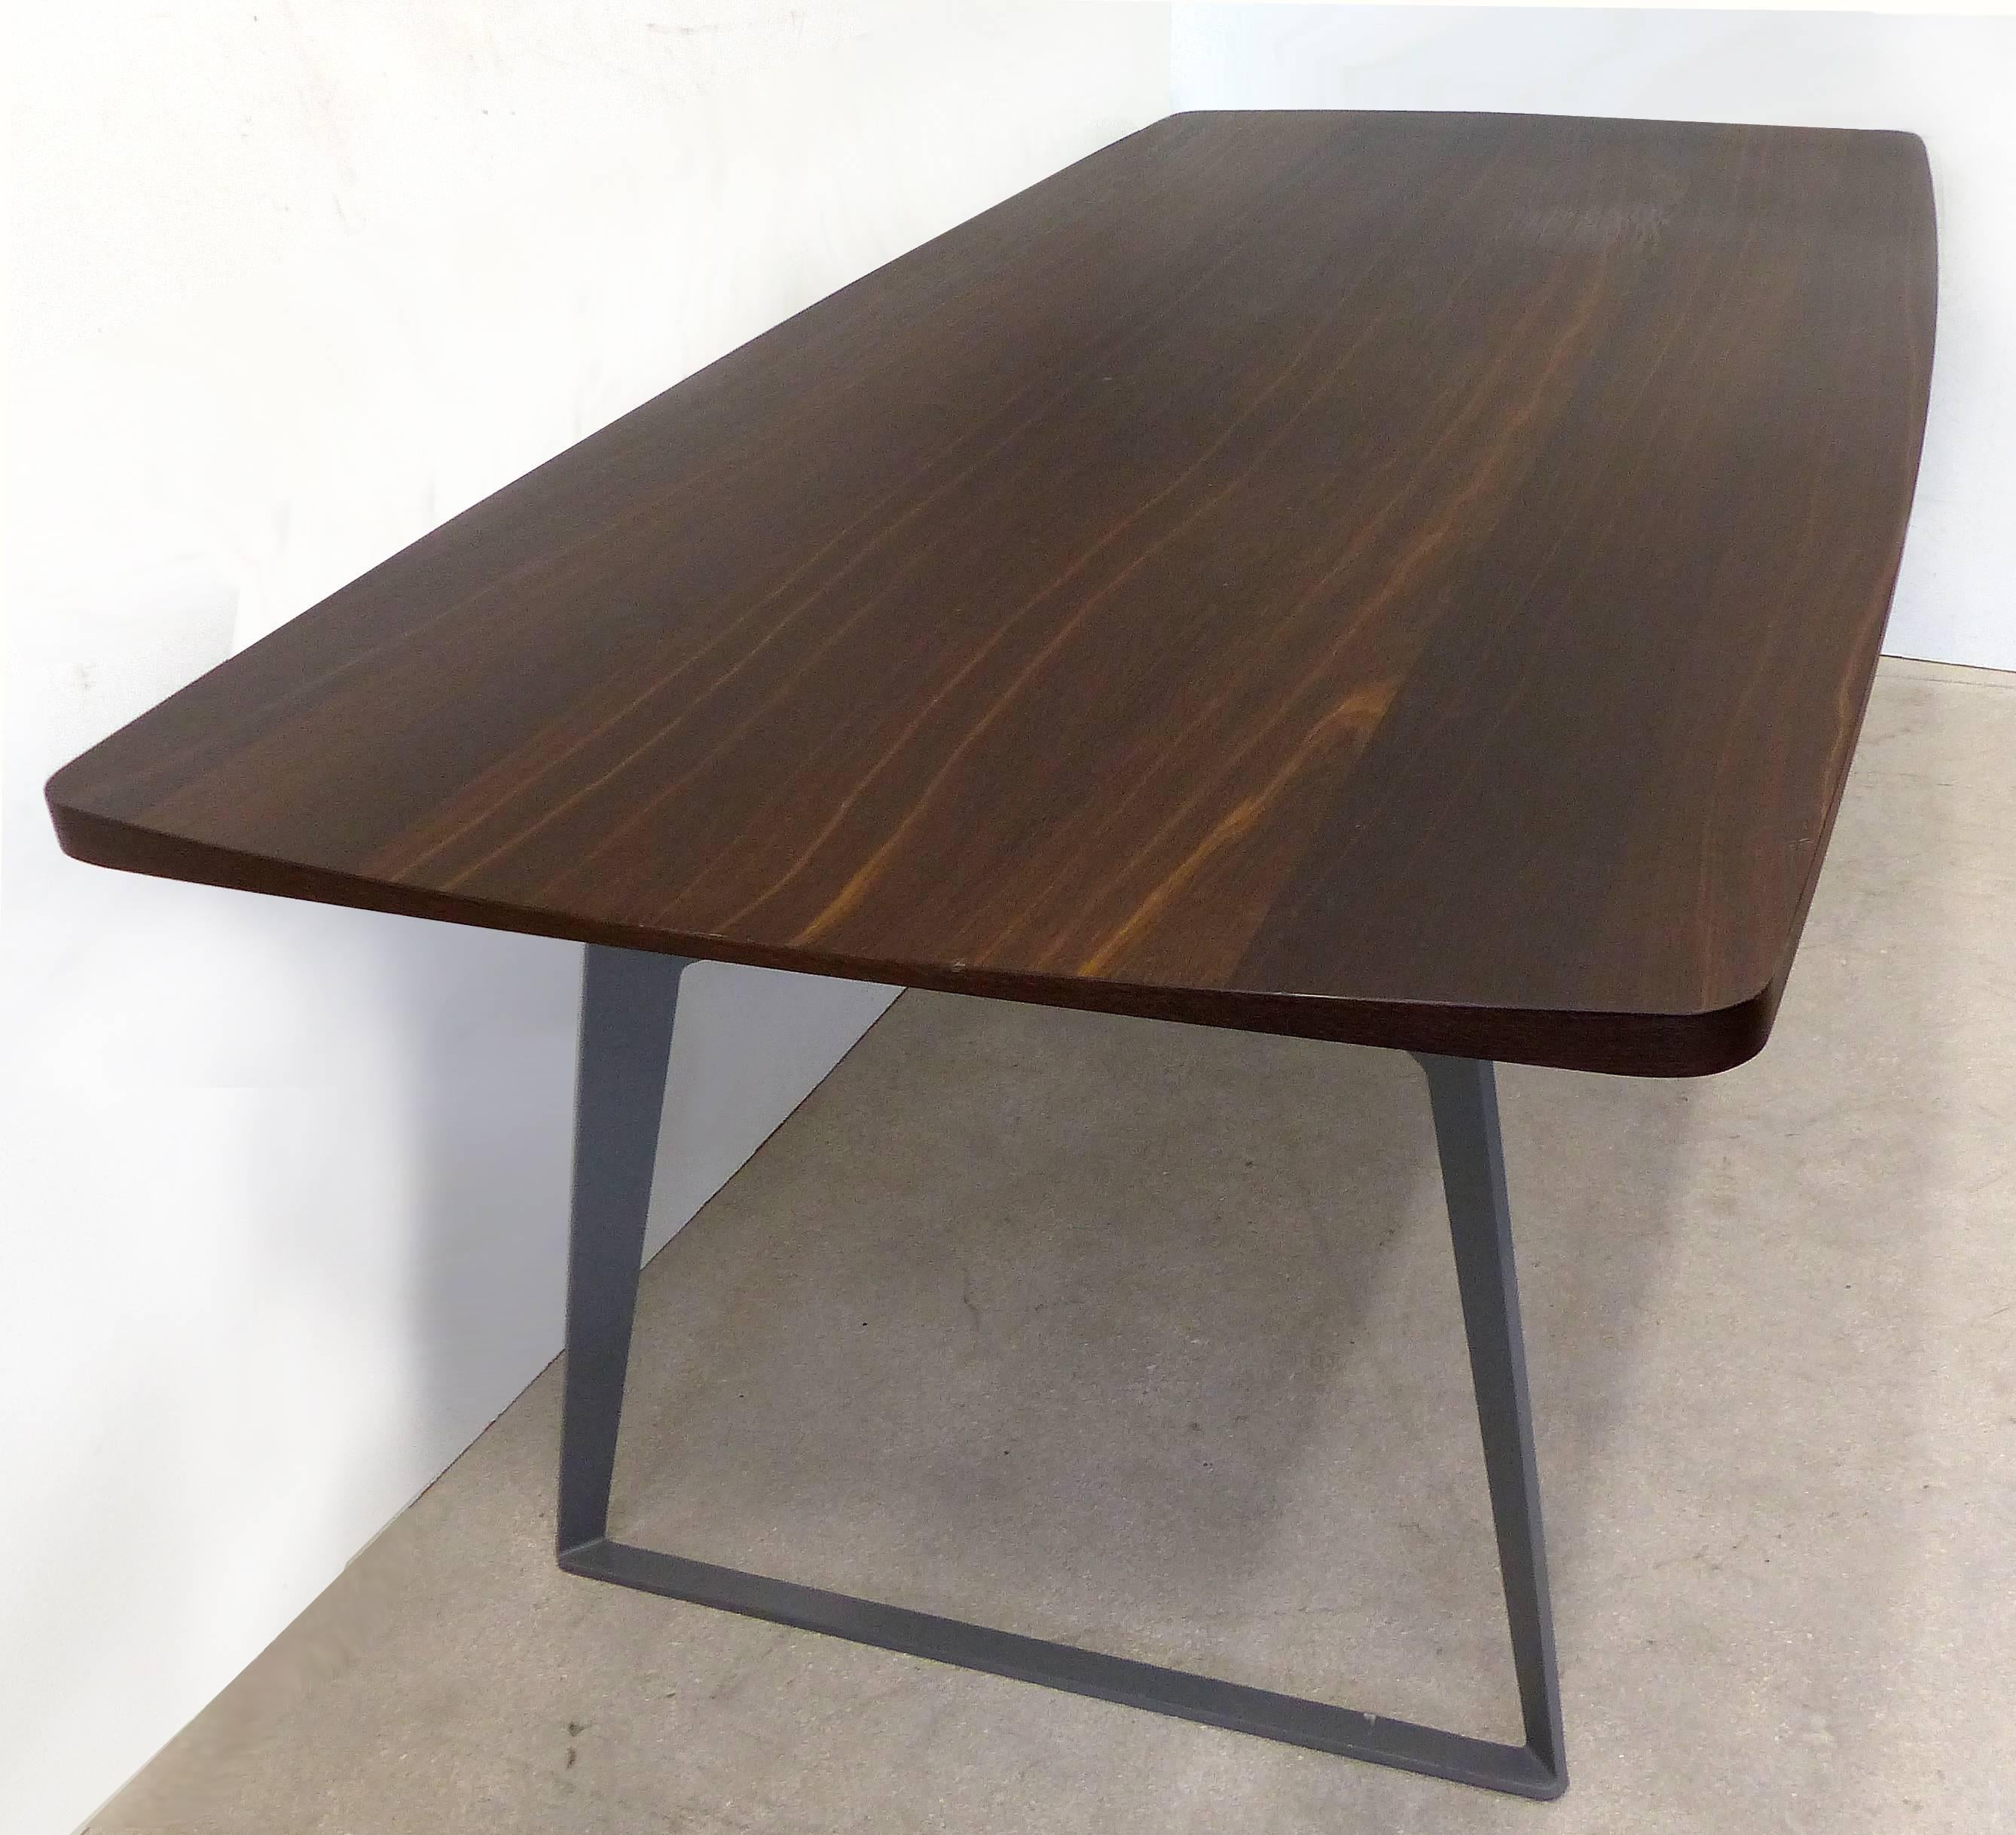 Carlo Colombo Clipper Table from Poliform

Offered for sale is an authentic Carlo Colombo 